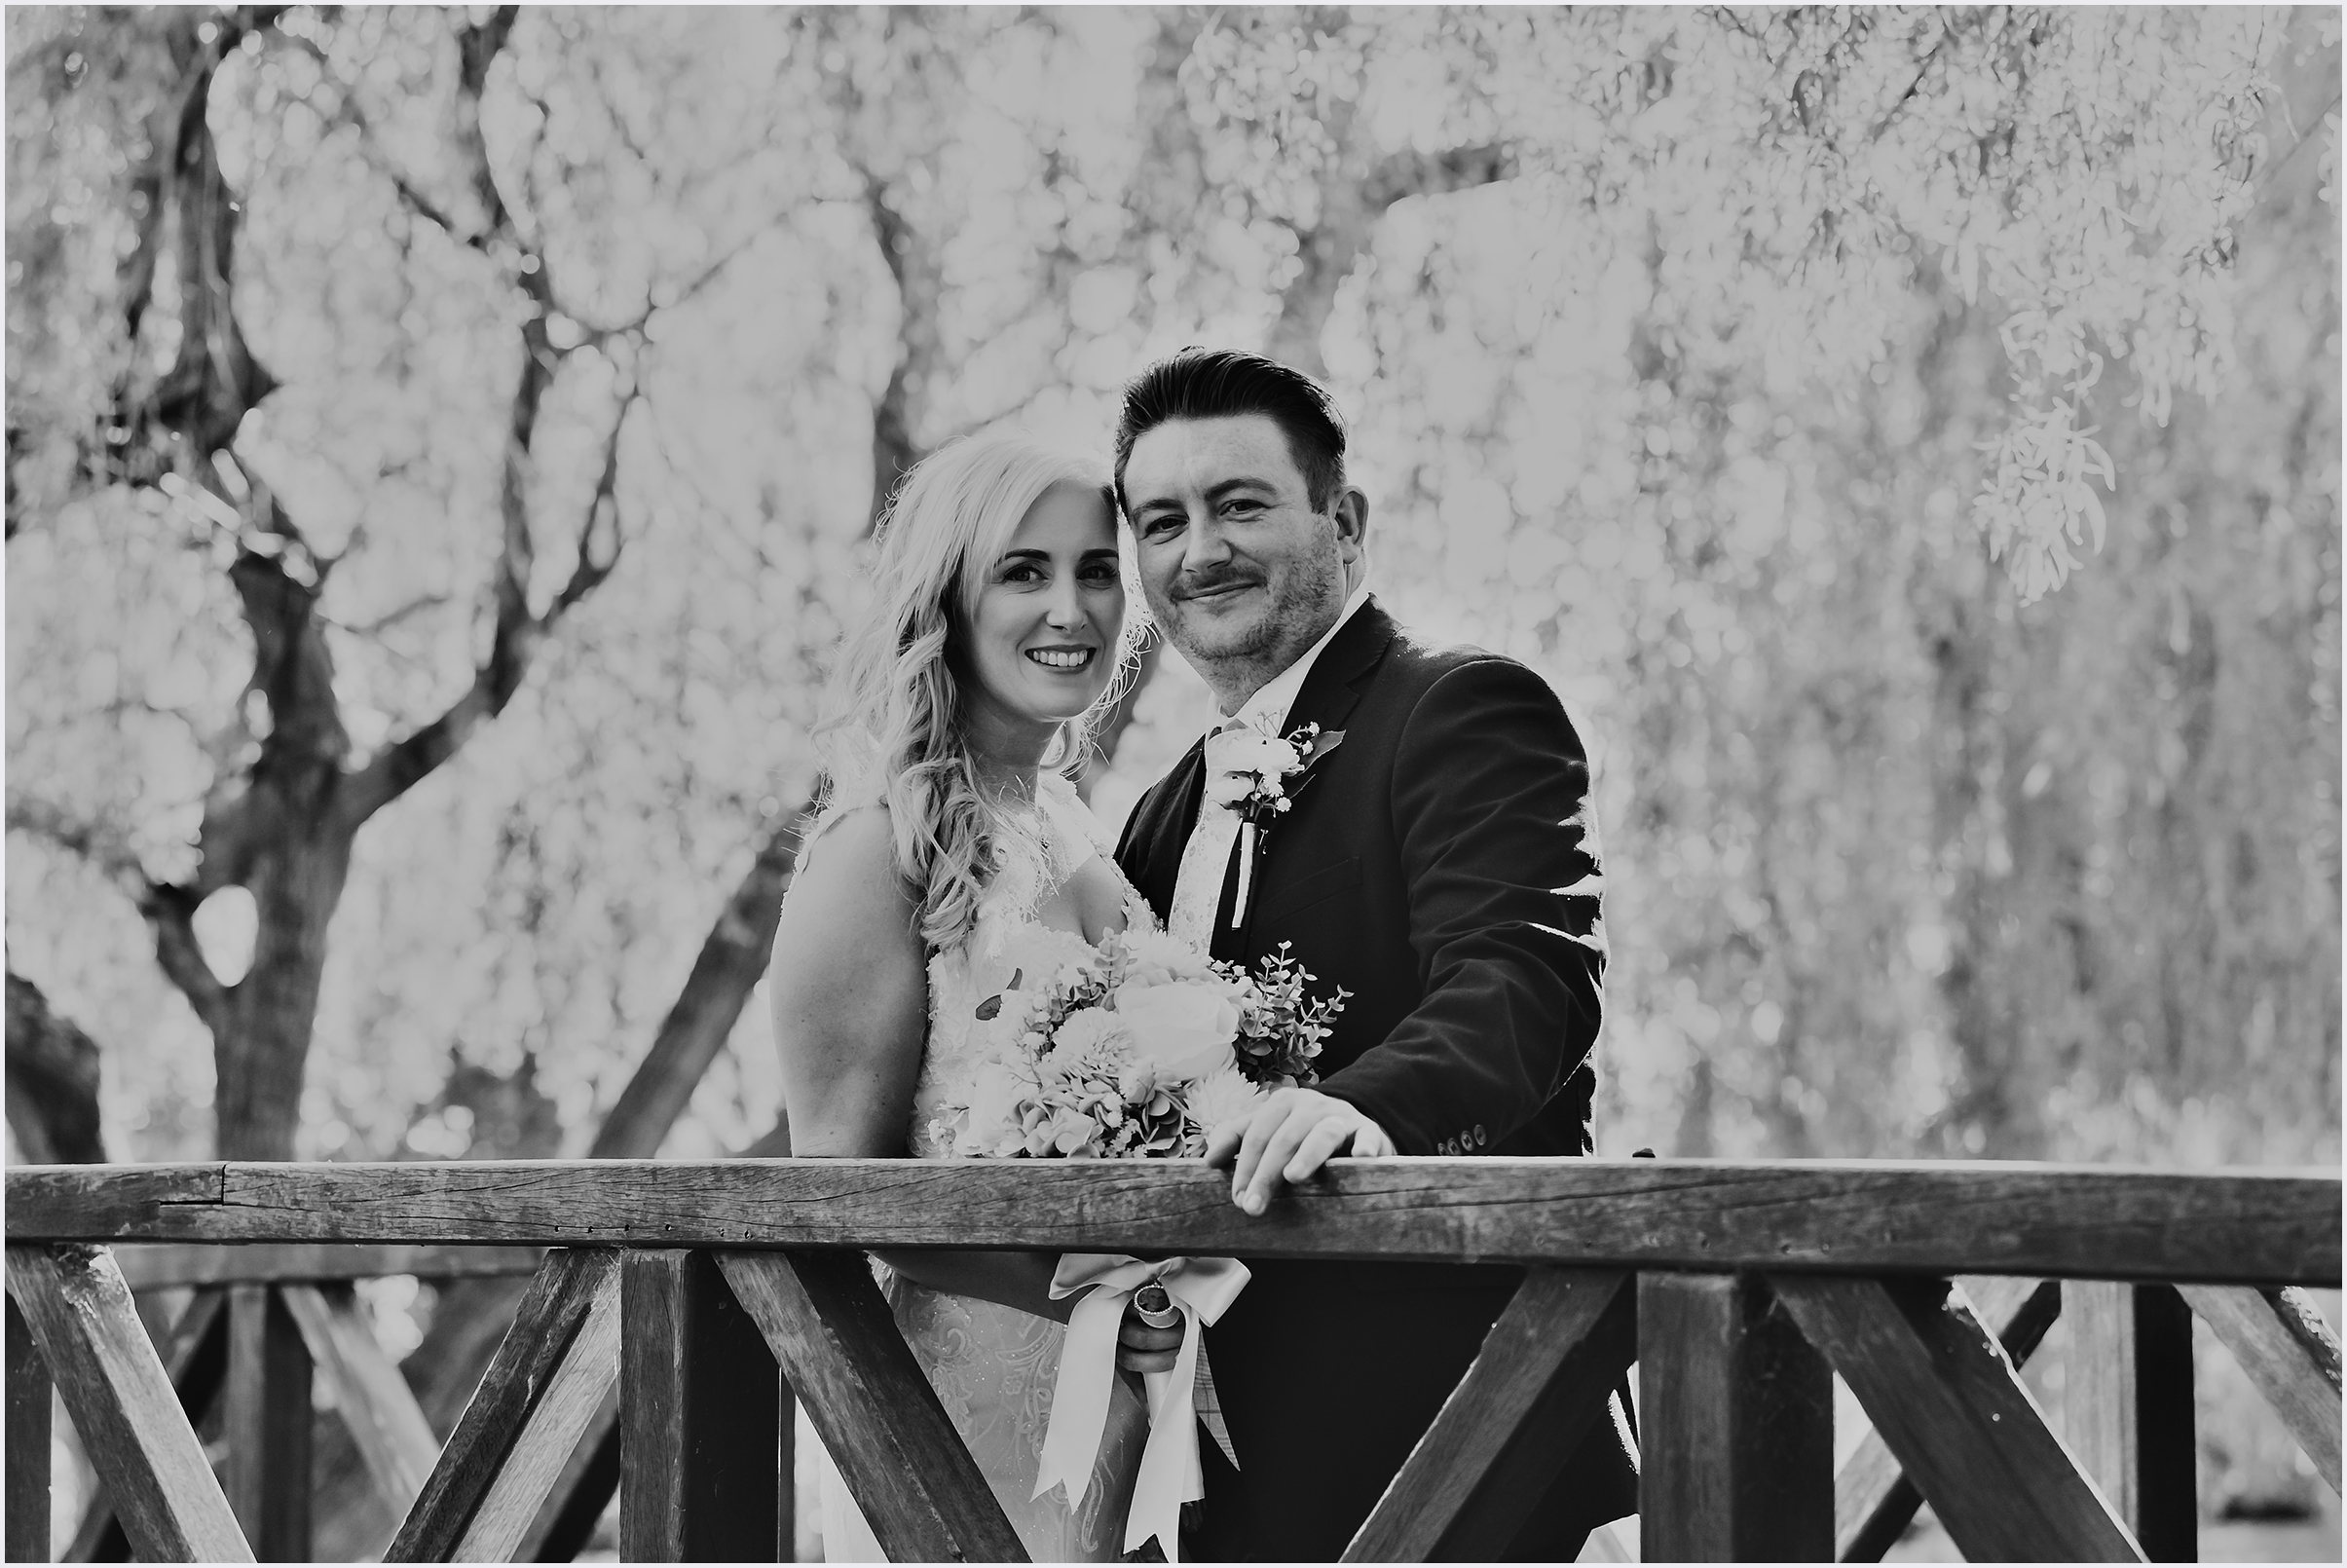 A groom's hand rests on the railing of a wooden bridge as he stands next to his new wife smiling at the camera during the bride and groom portraits at The Grosvenor Pulford Hotel and Spa.